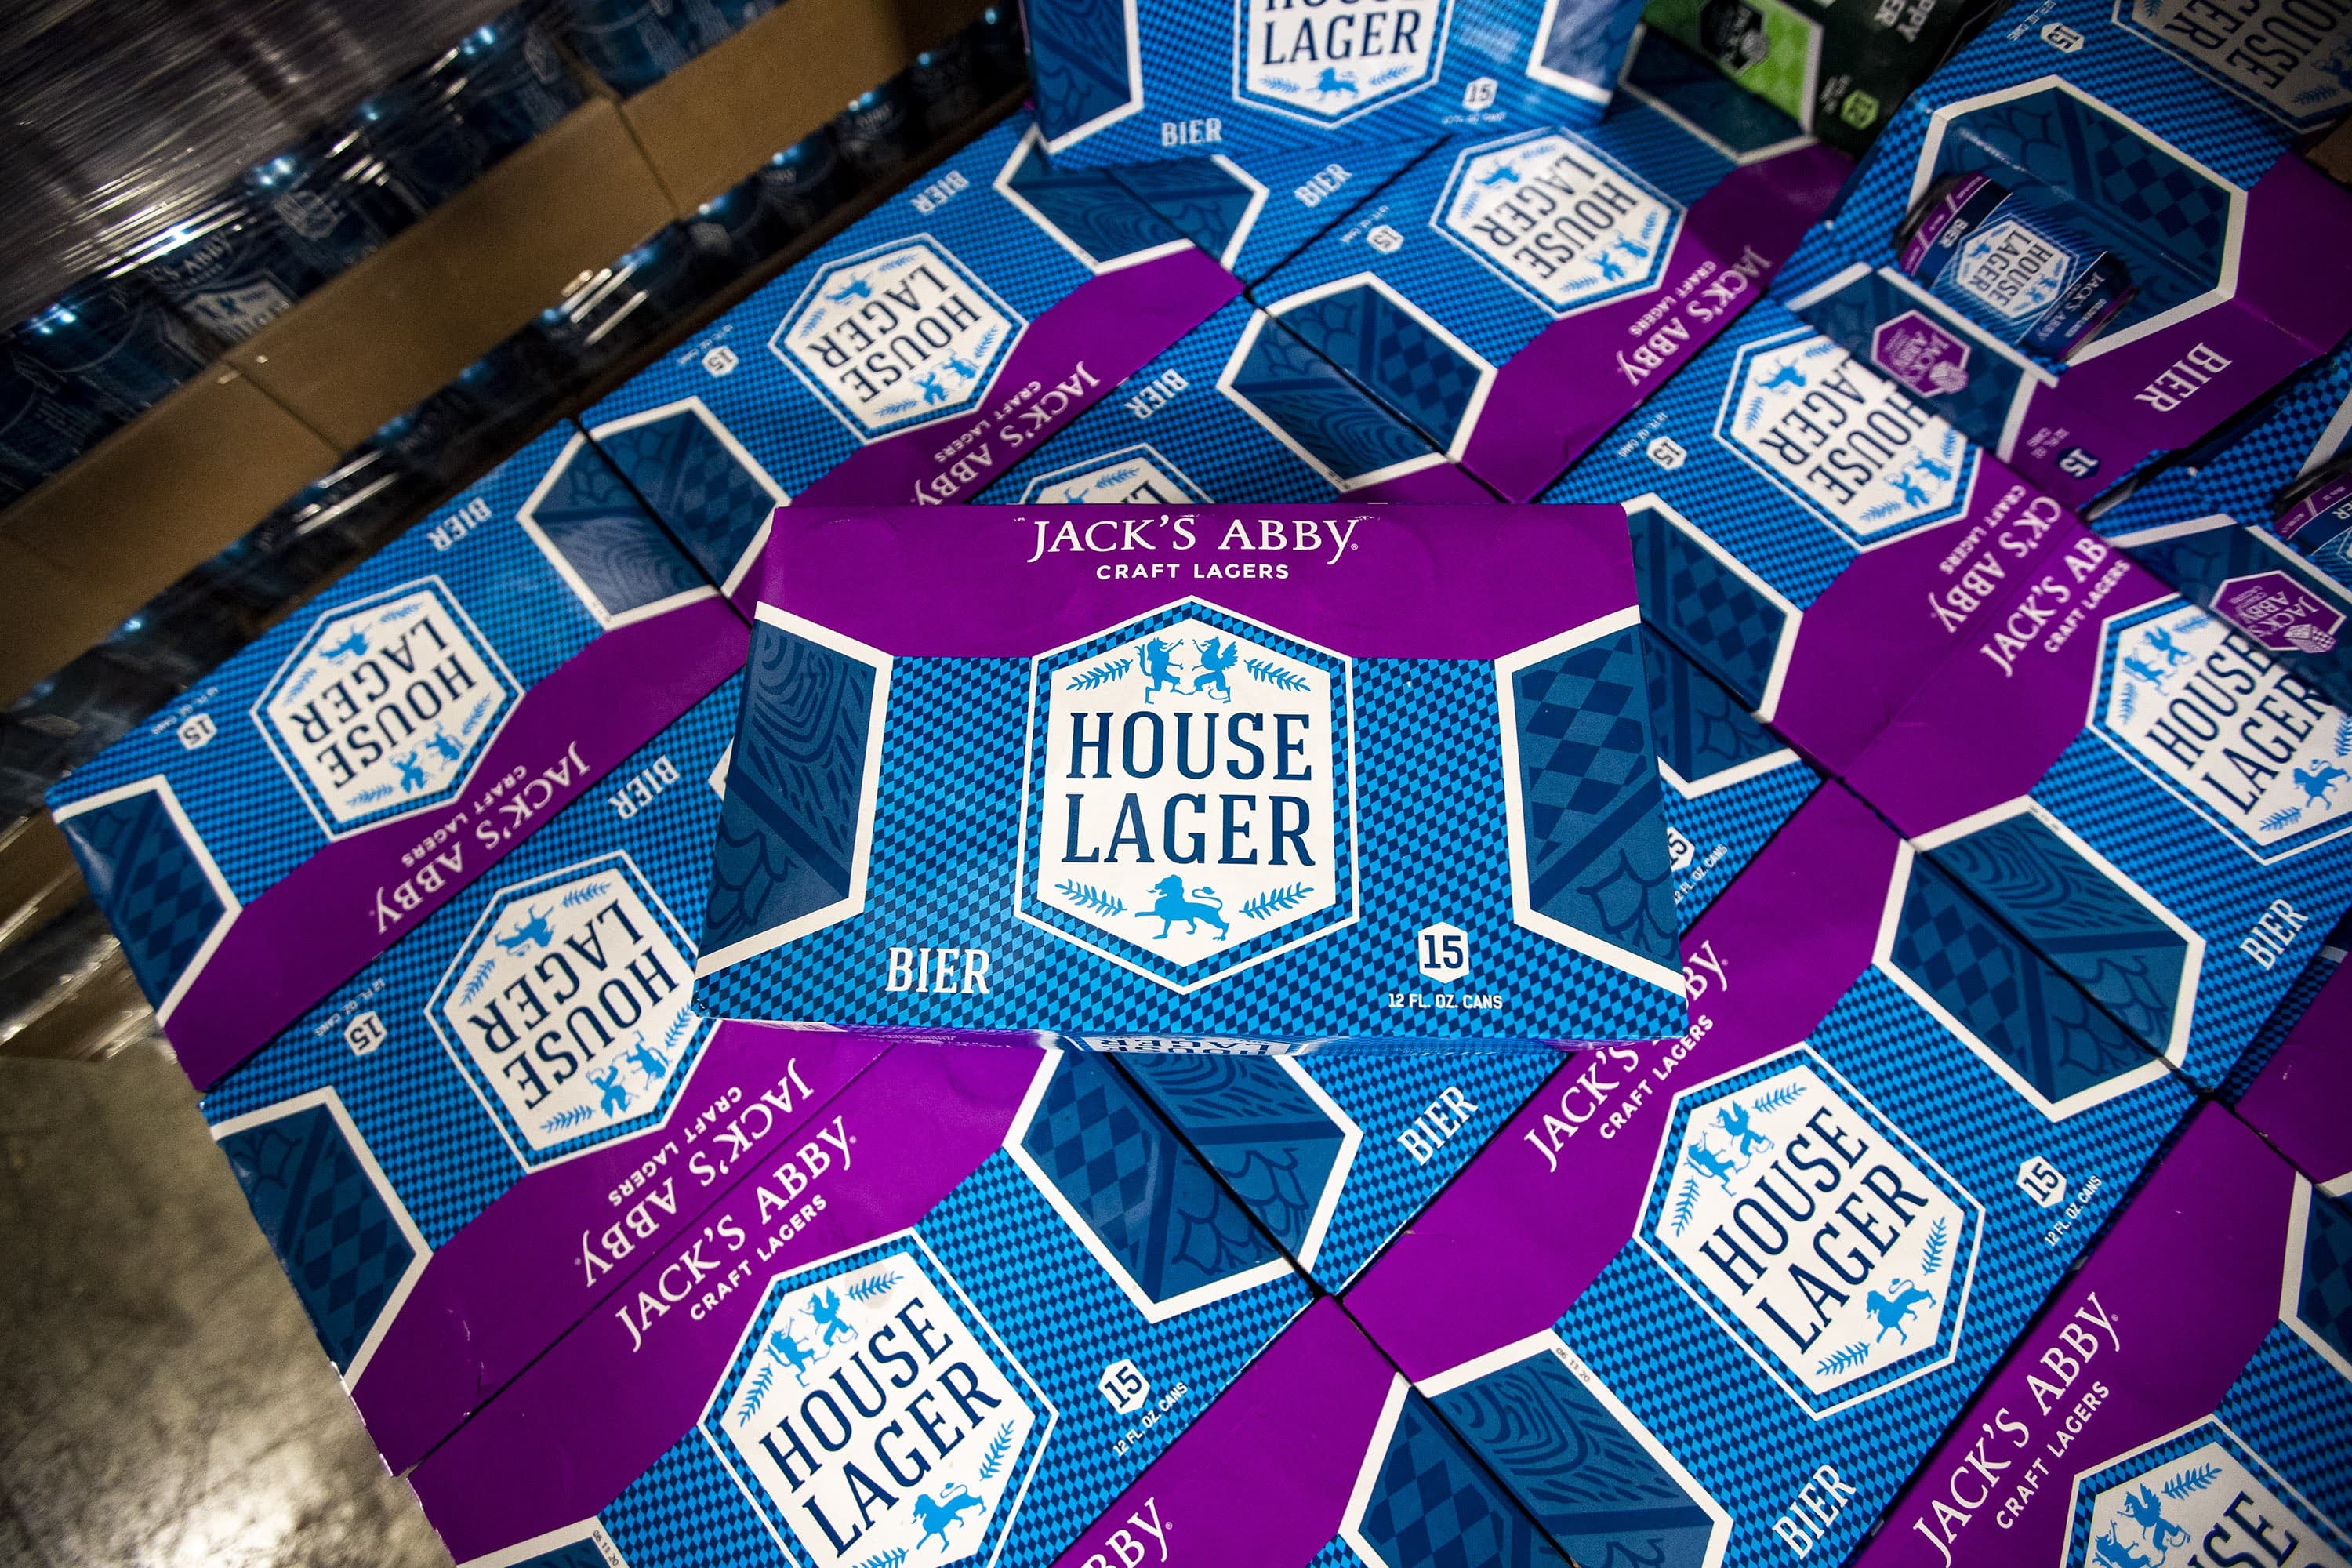 Jack's Abby expected more of these House Lager 15-pack cartons to arrive before Independence Day weekend, but the shipment was delayed. (Jesse Costa/WBUR)